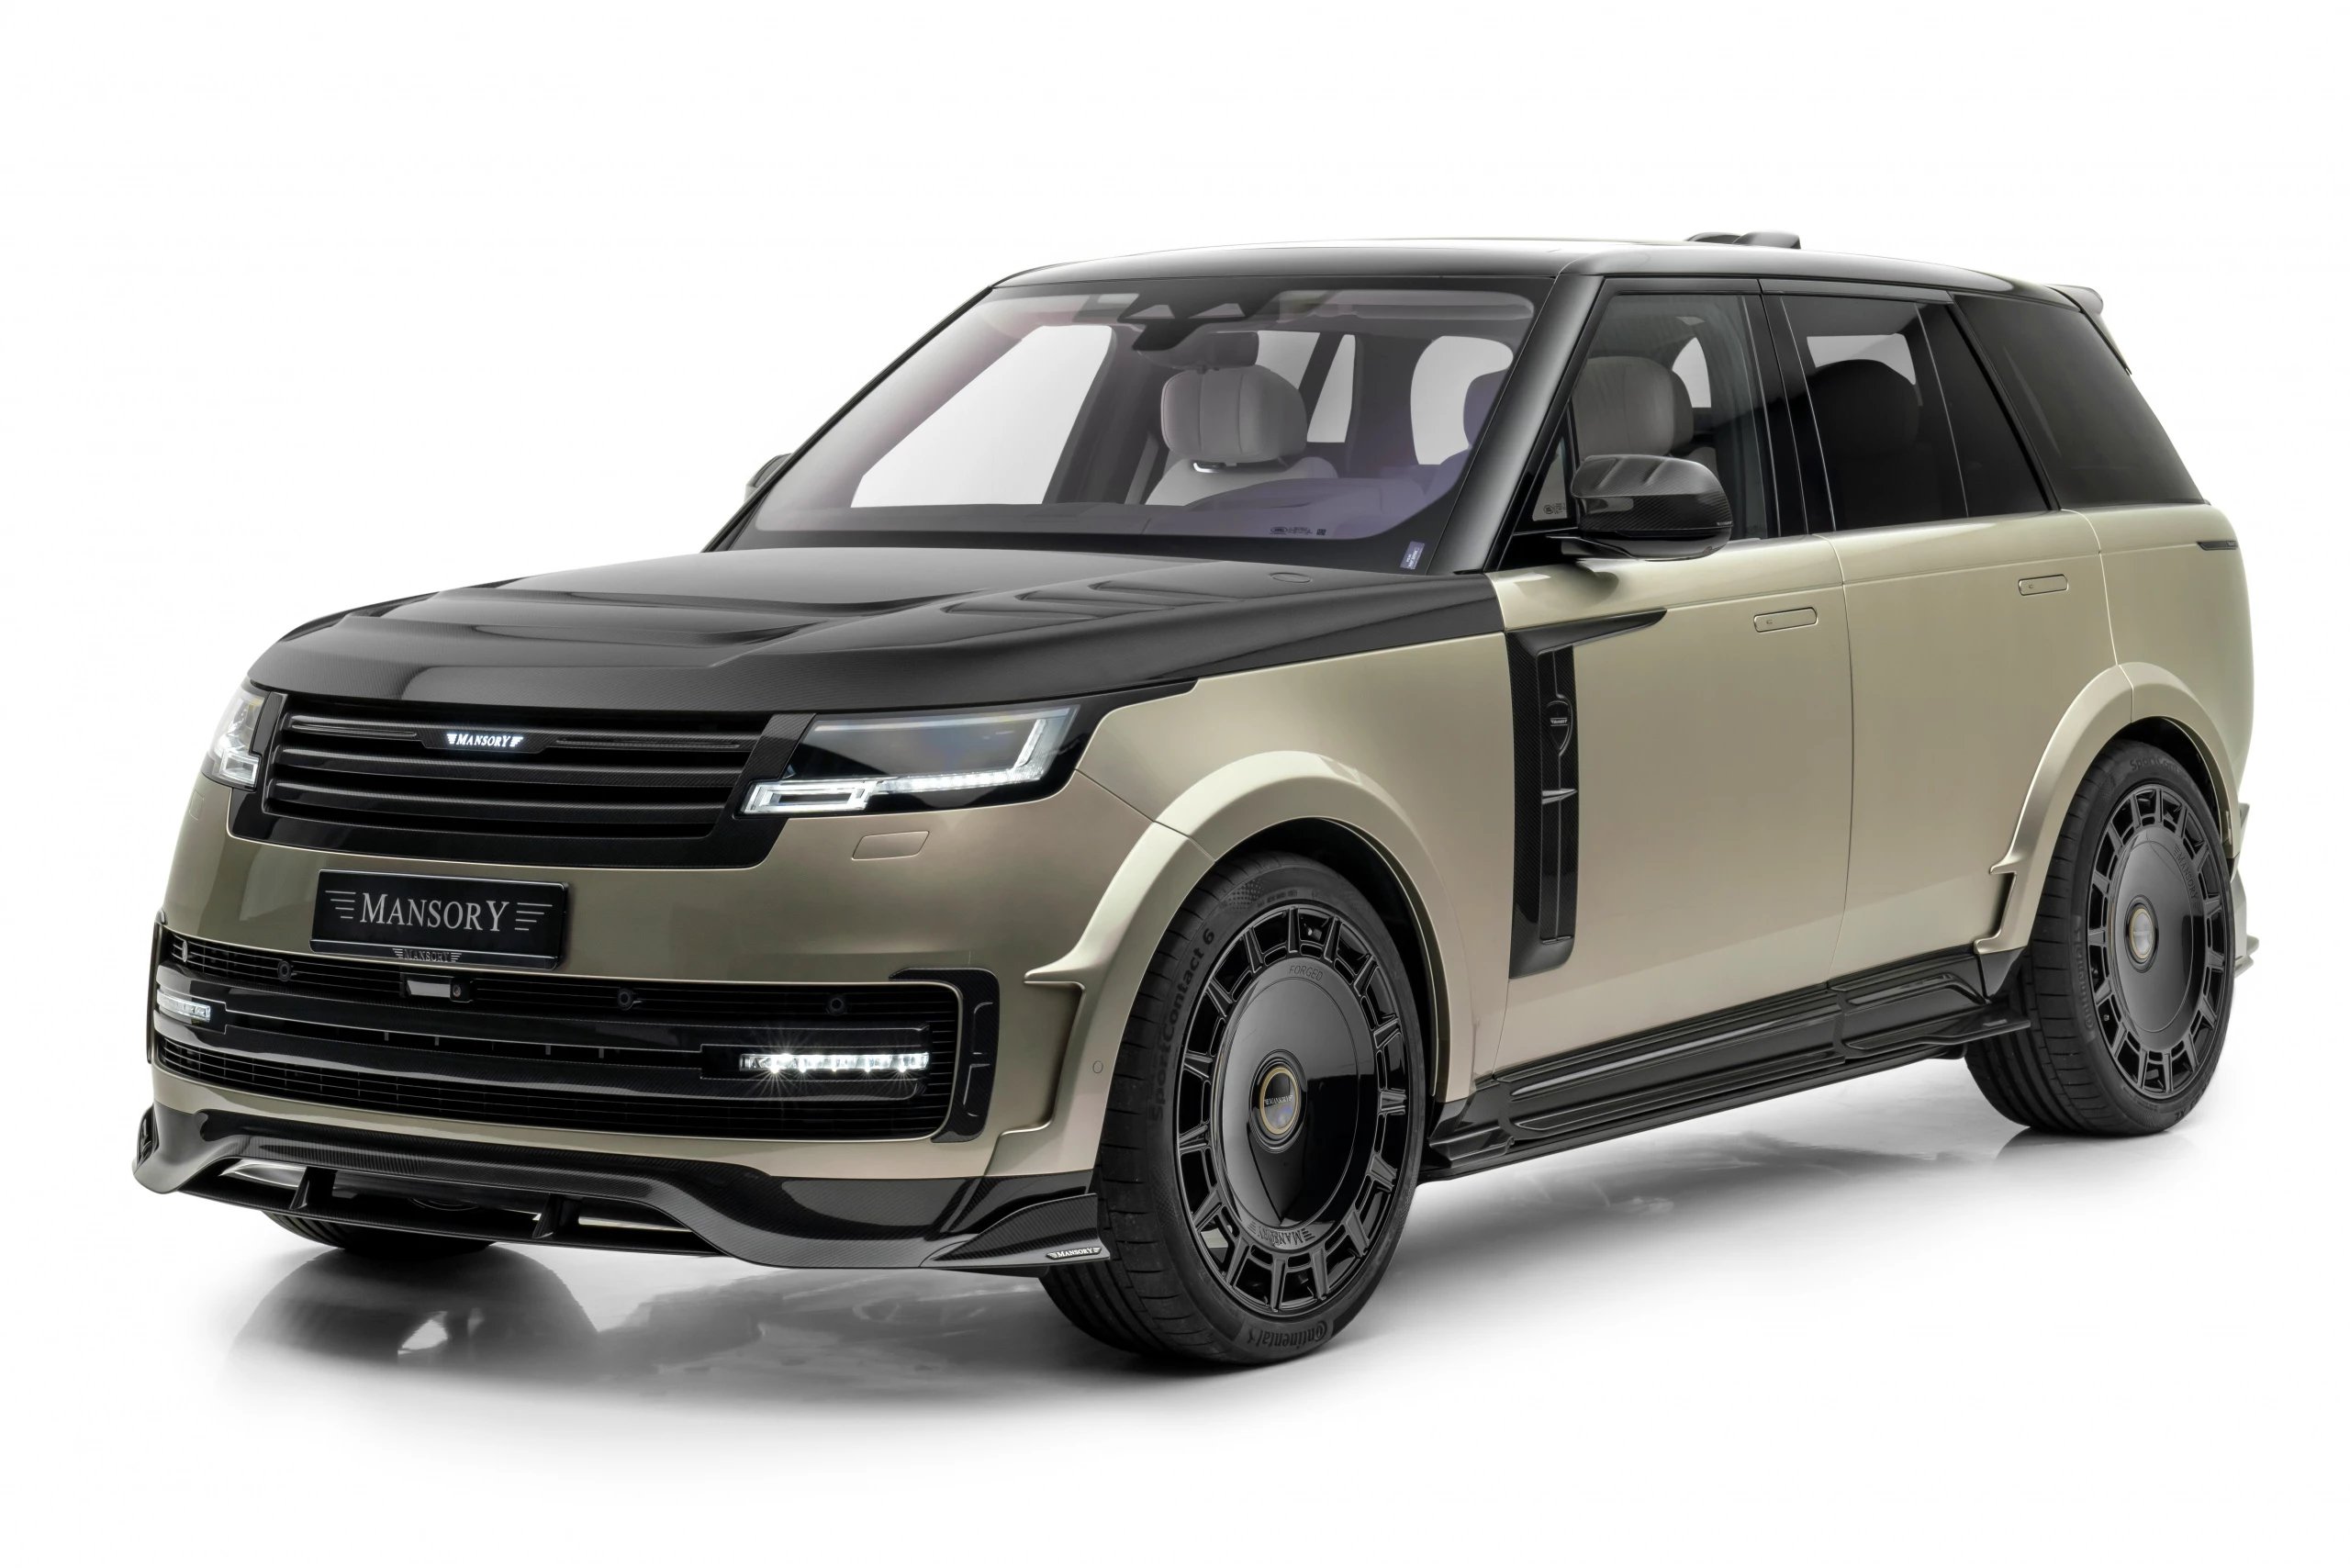 MANSORY's Exquisite Refinement Programme: Taking the New Range Rover to Unprecedented Heights